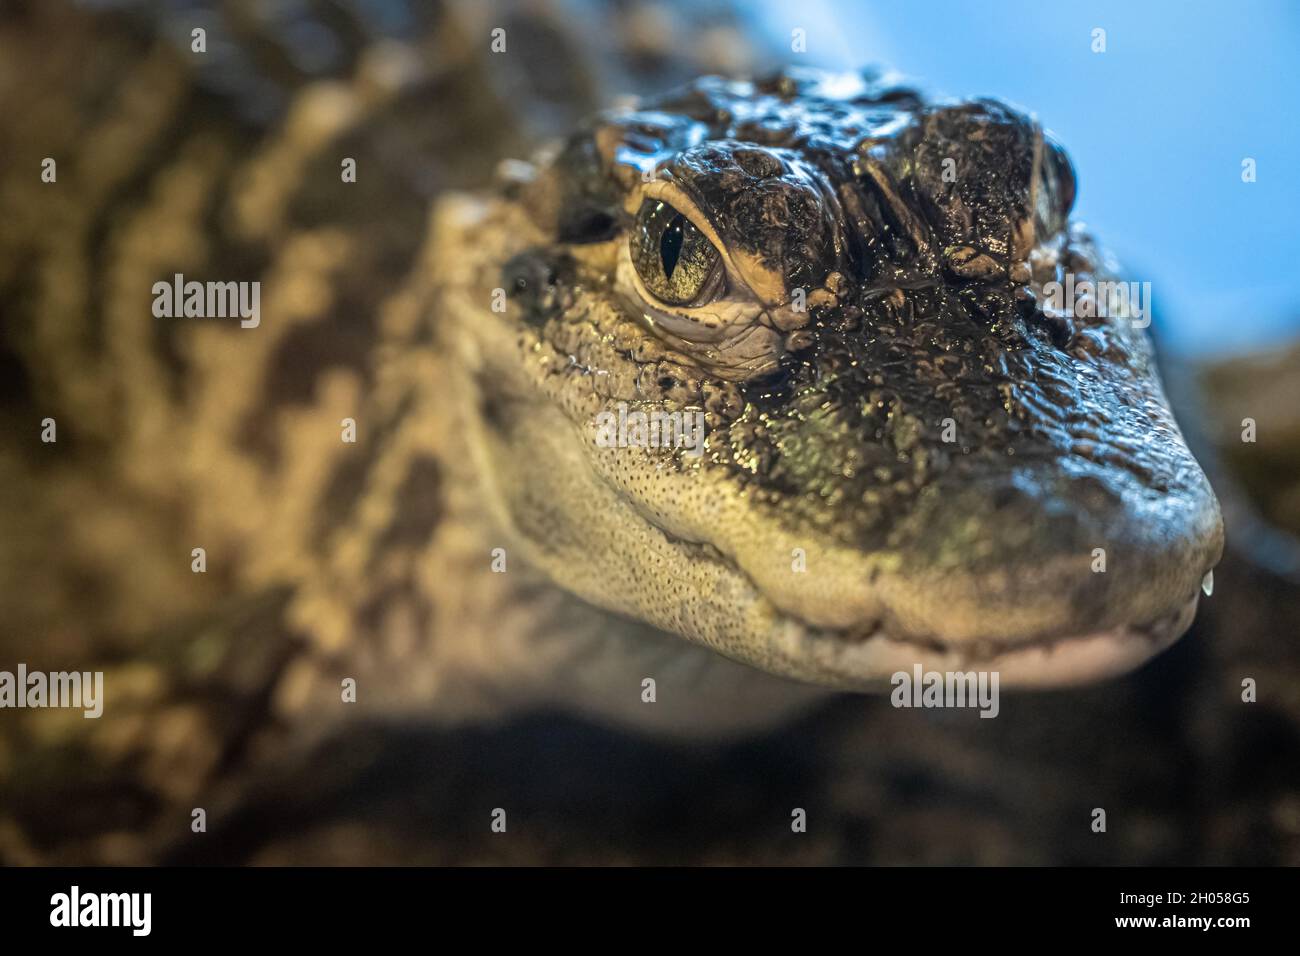 Close-up of a staring alligator (Alligator mississippiensis) at the GTM Research Reserve Visitors Center in Ponte Vedra Beach, Florida. (USA) Stock Photo